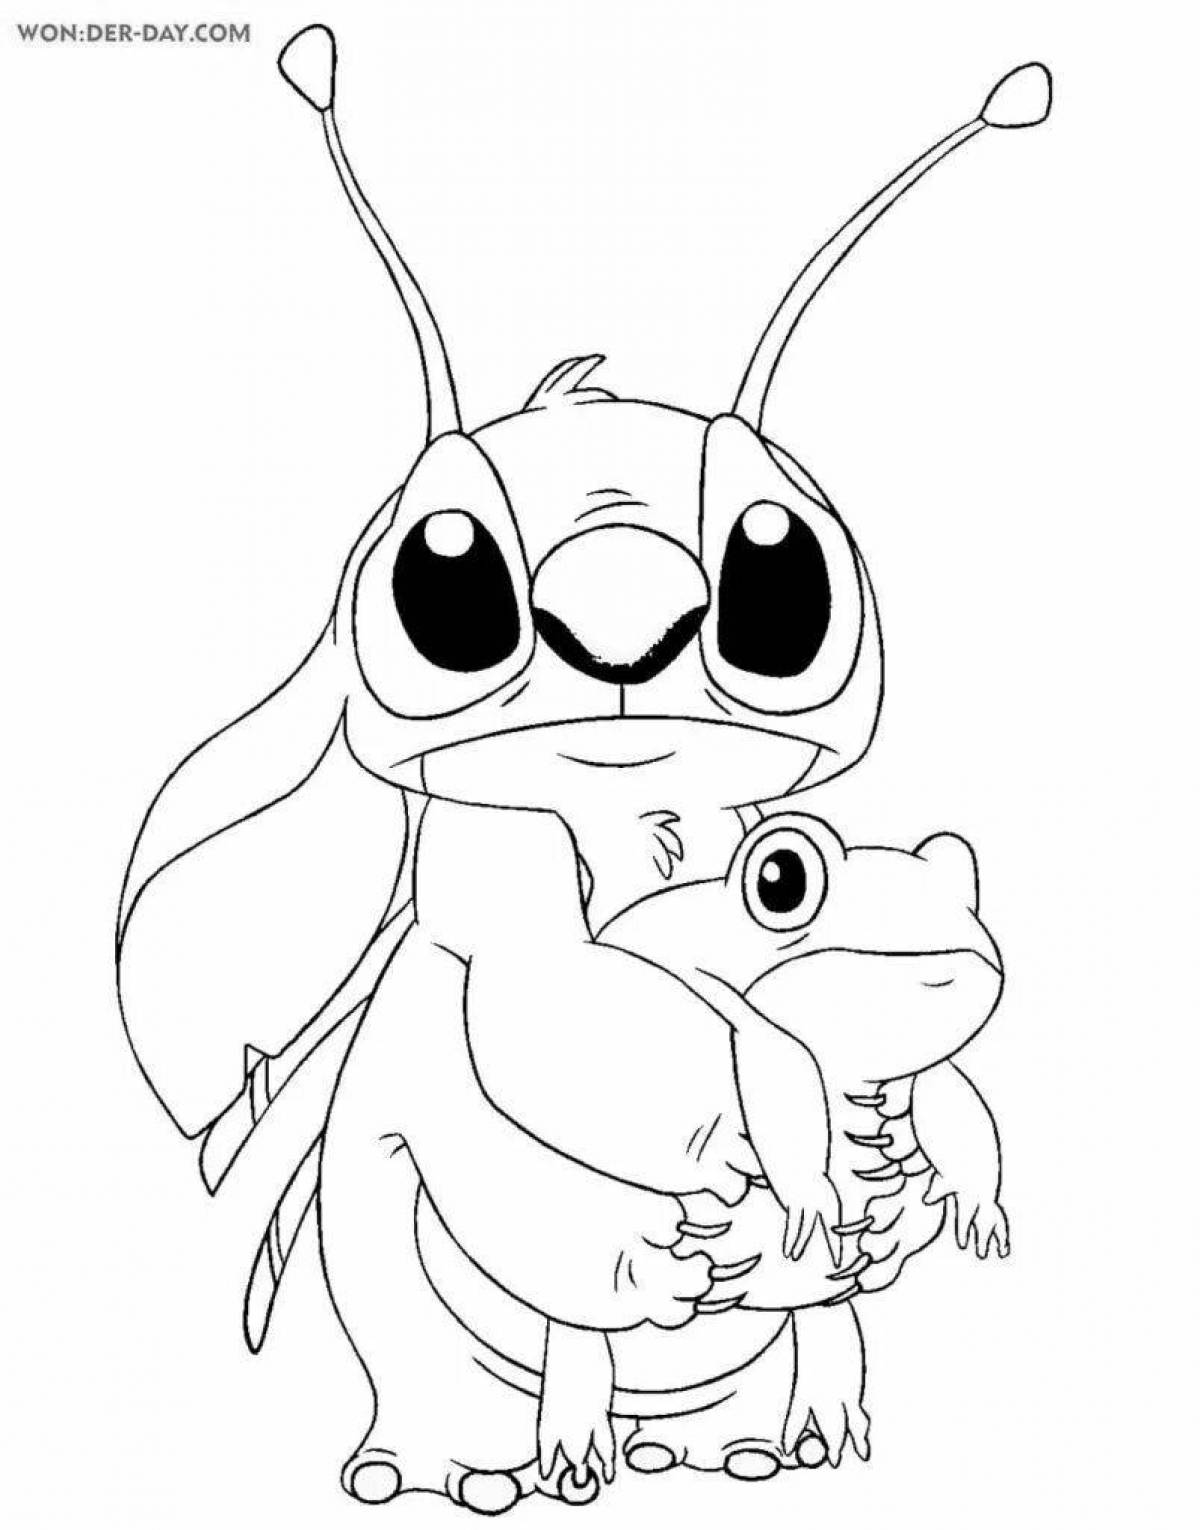 Coloring lovely stitch and angel